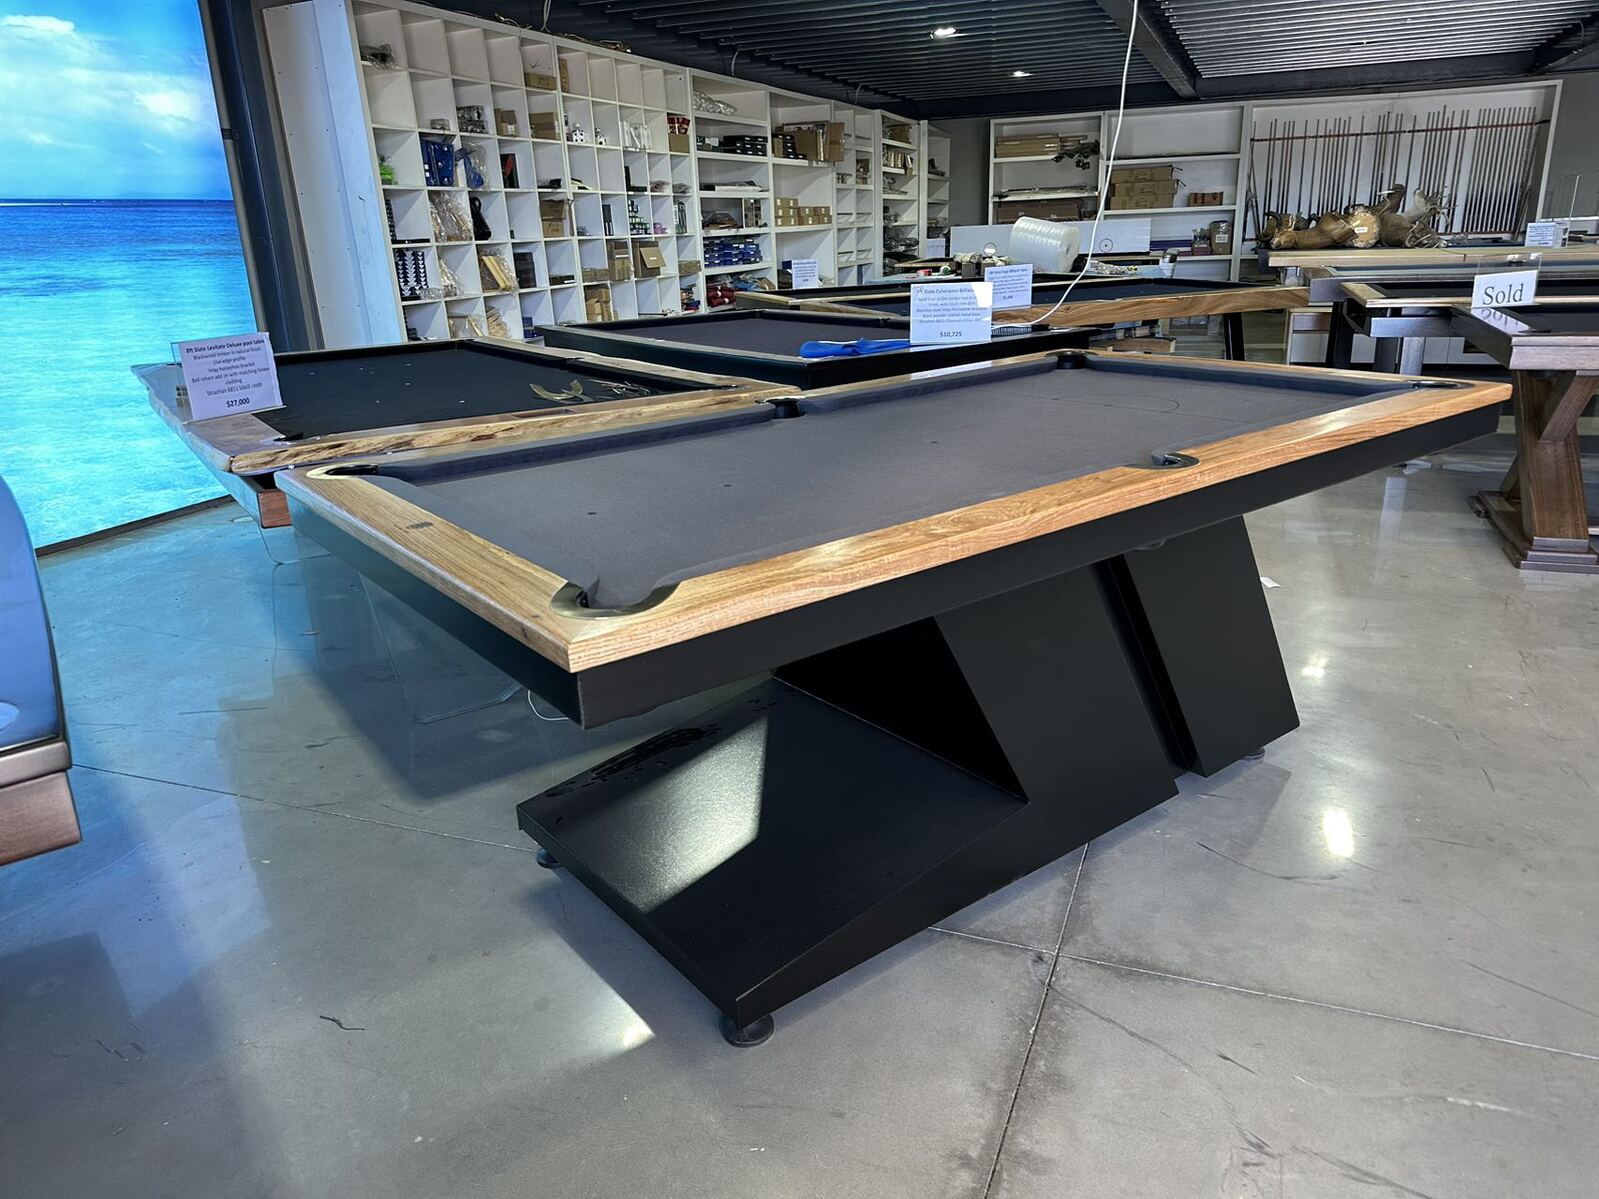 Pre-Made 7ft Slate CyberPool Billiards Table, Aged English Elm Timber Top